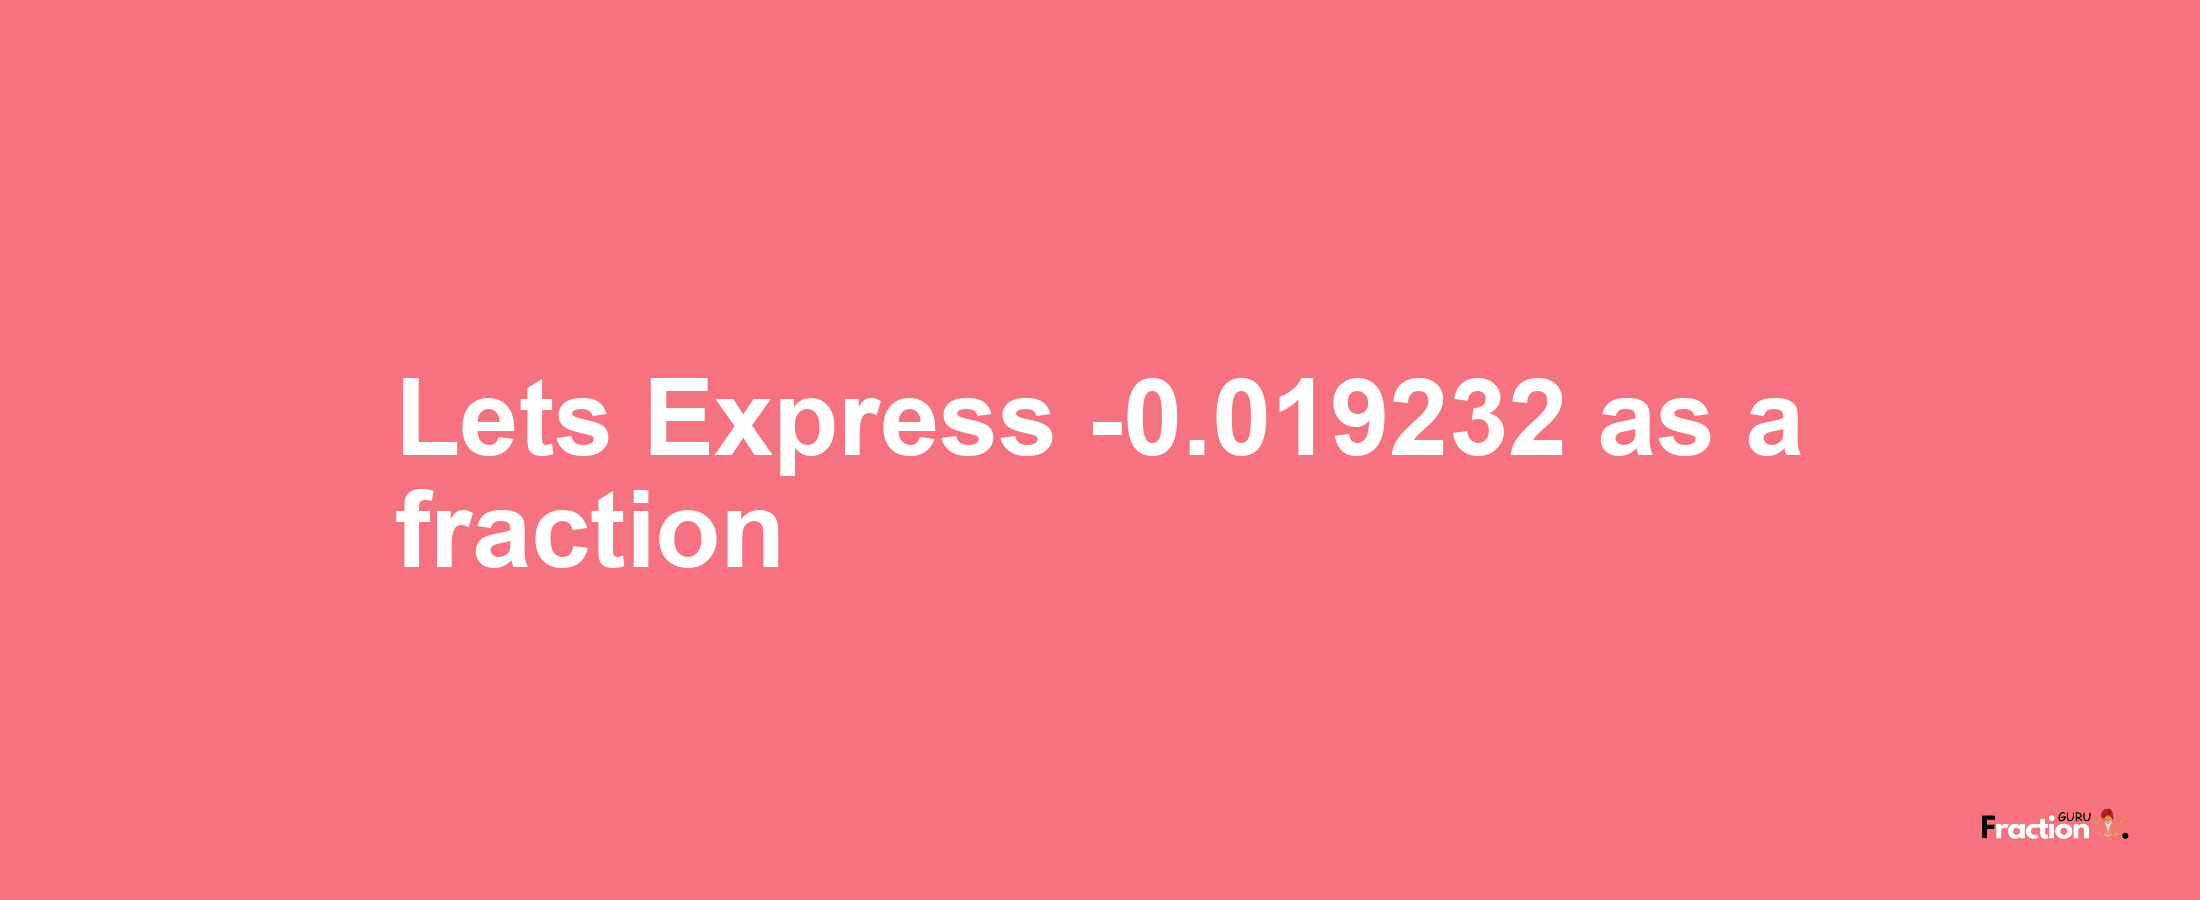 Lets Express -0.019232 as afraction